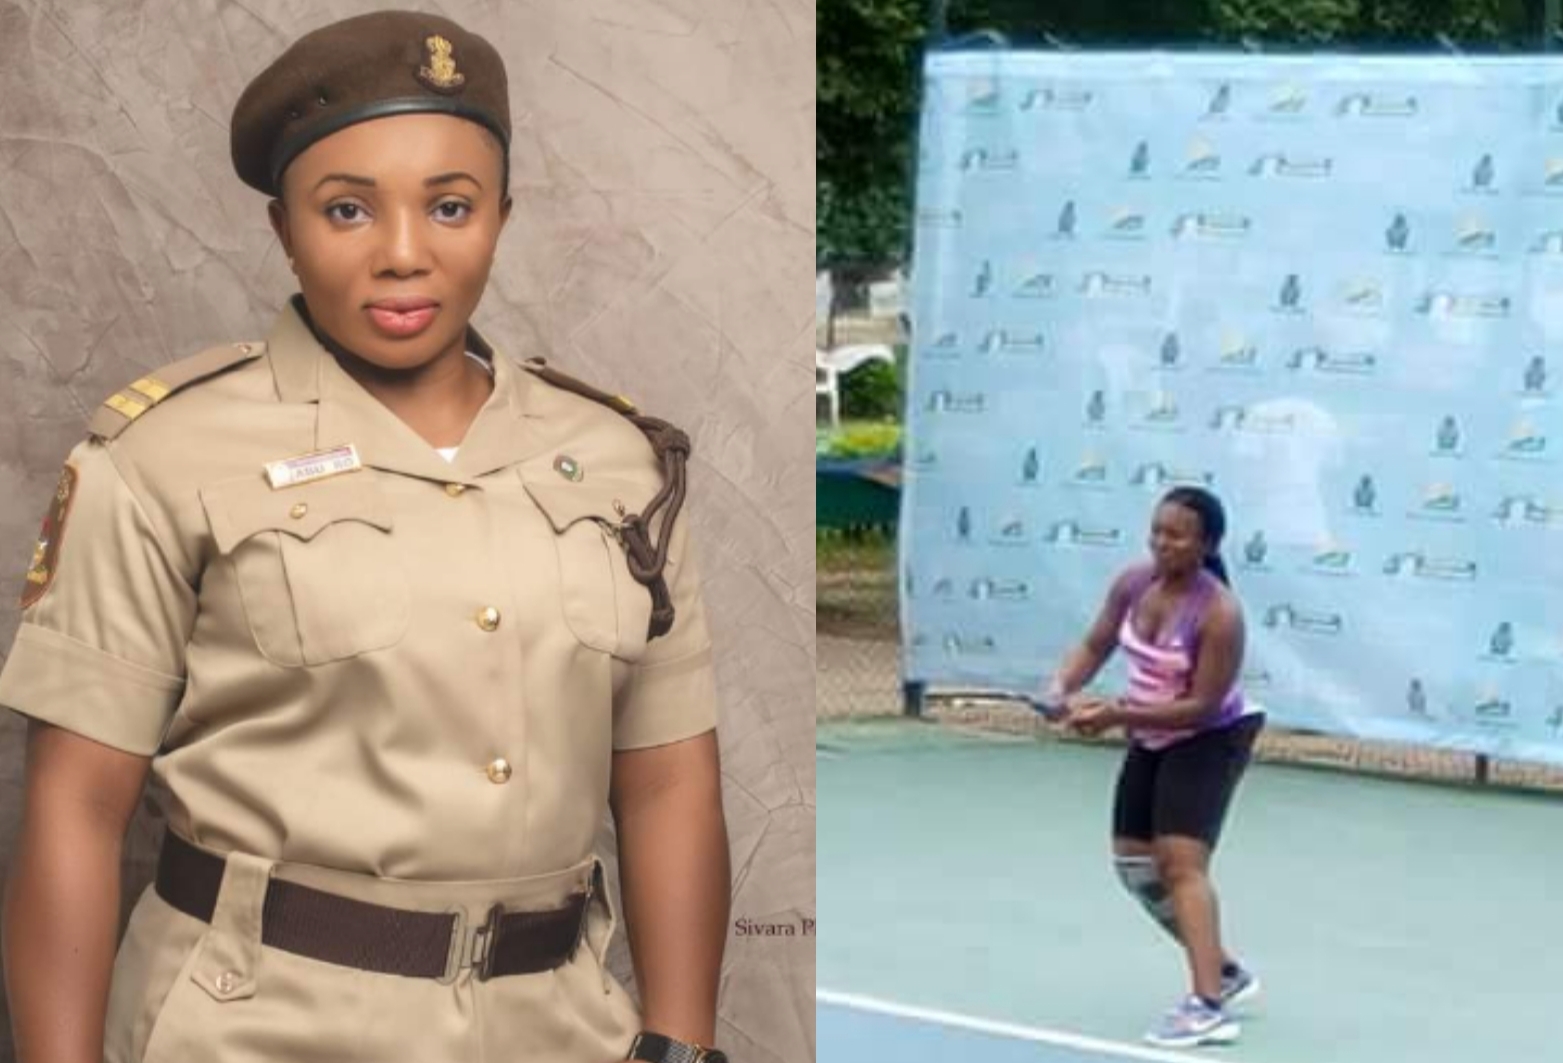 Rose Abu: The Beautiful Immigration Officer Who Plays, Officiates Tennis